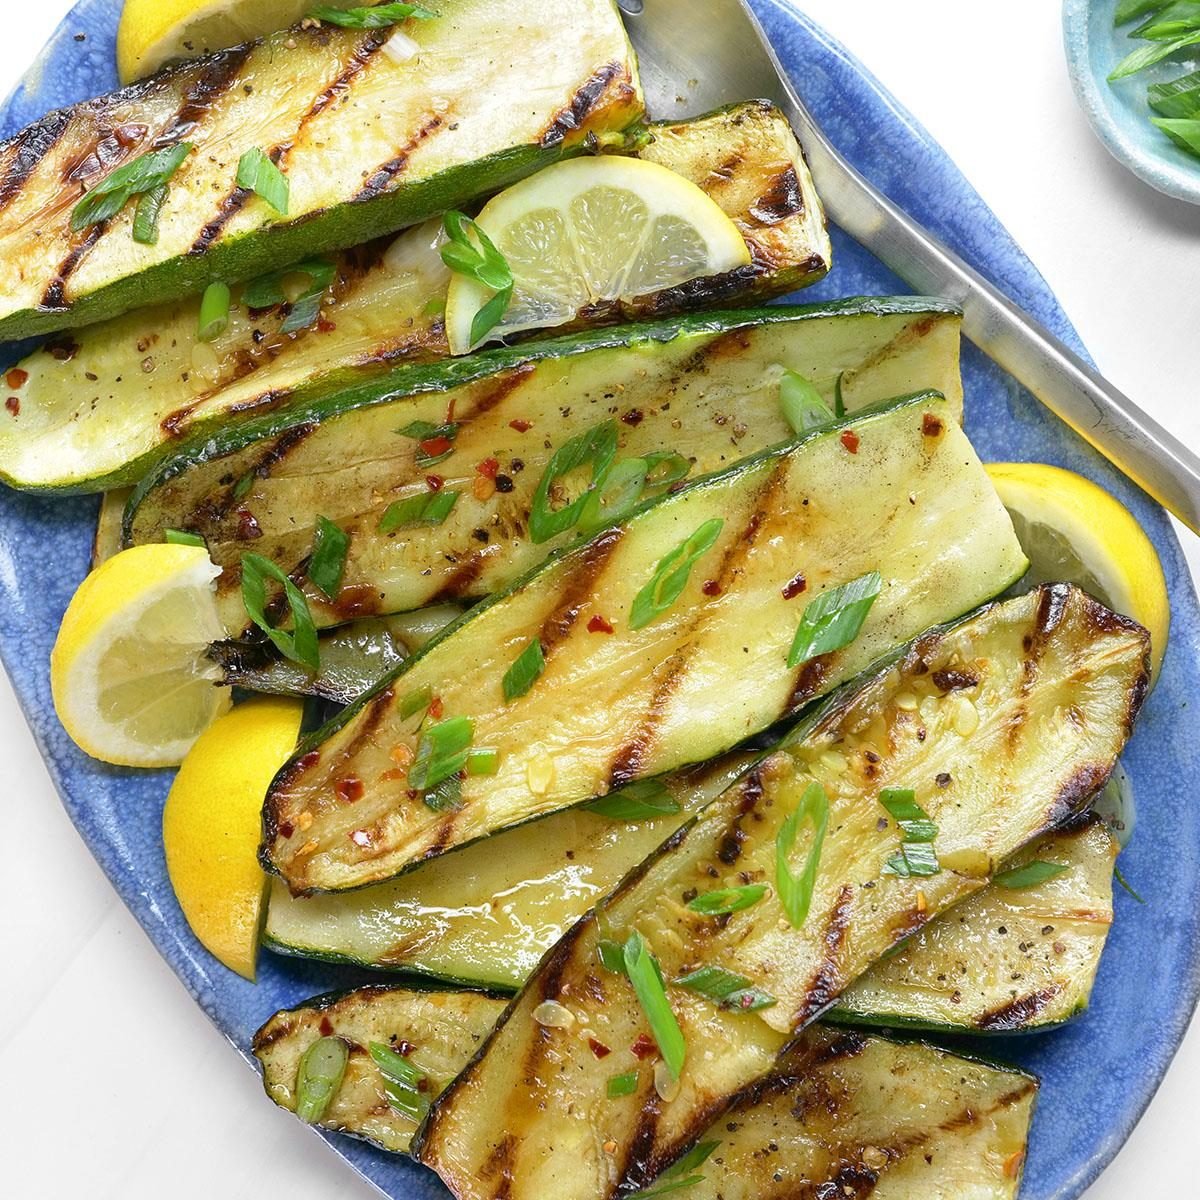 Grilled Zucchini With Onions Exps Thvp24 124903 Mr 06 11 1